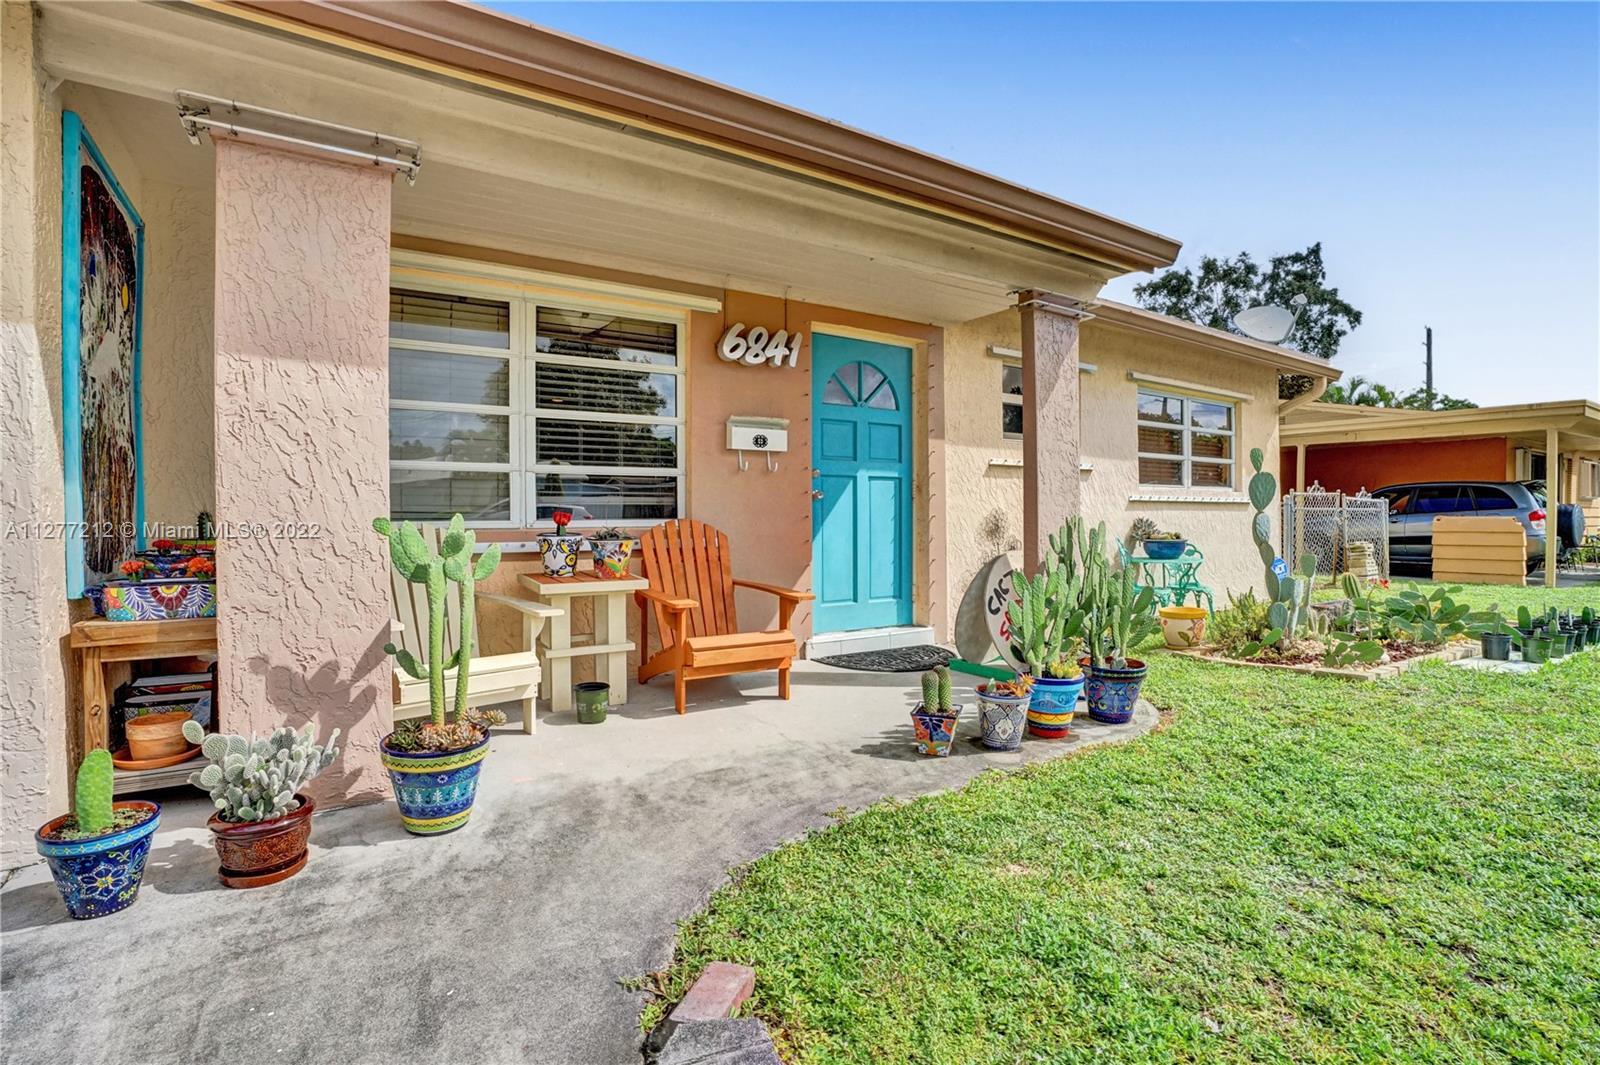 Welcome to this cozy and well maintained home centrally located in the Driftwood area of Hollywood. 